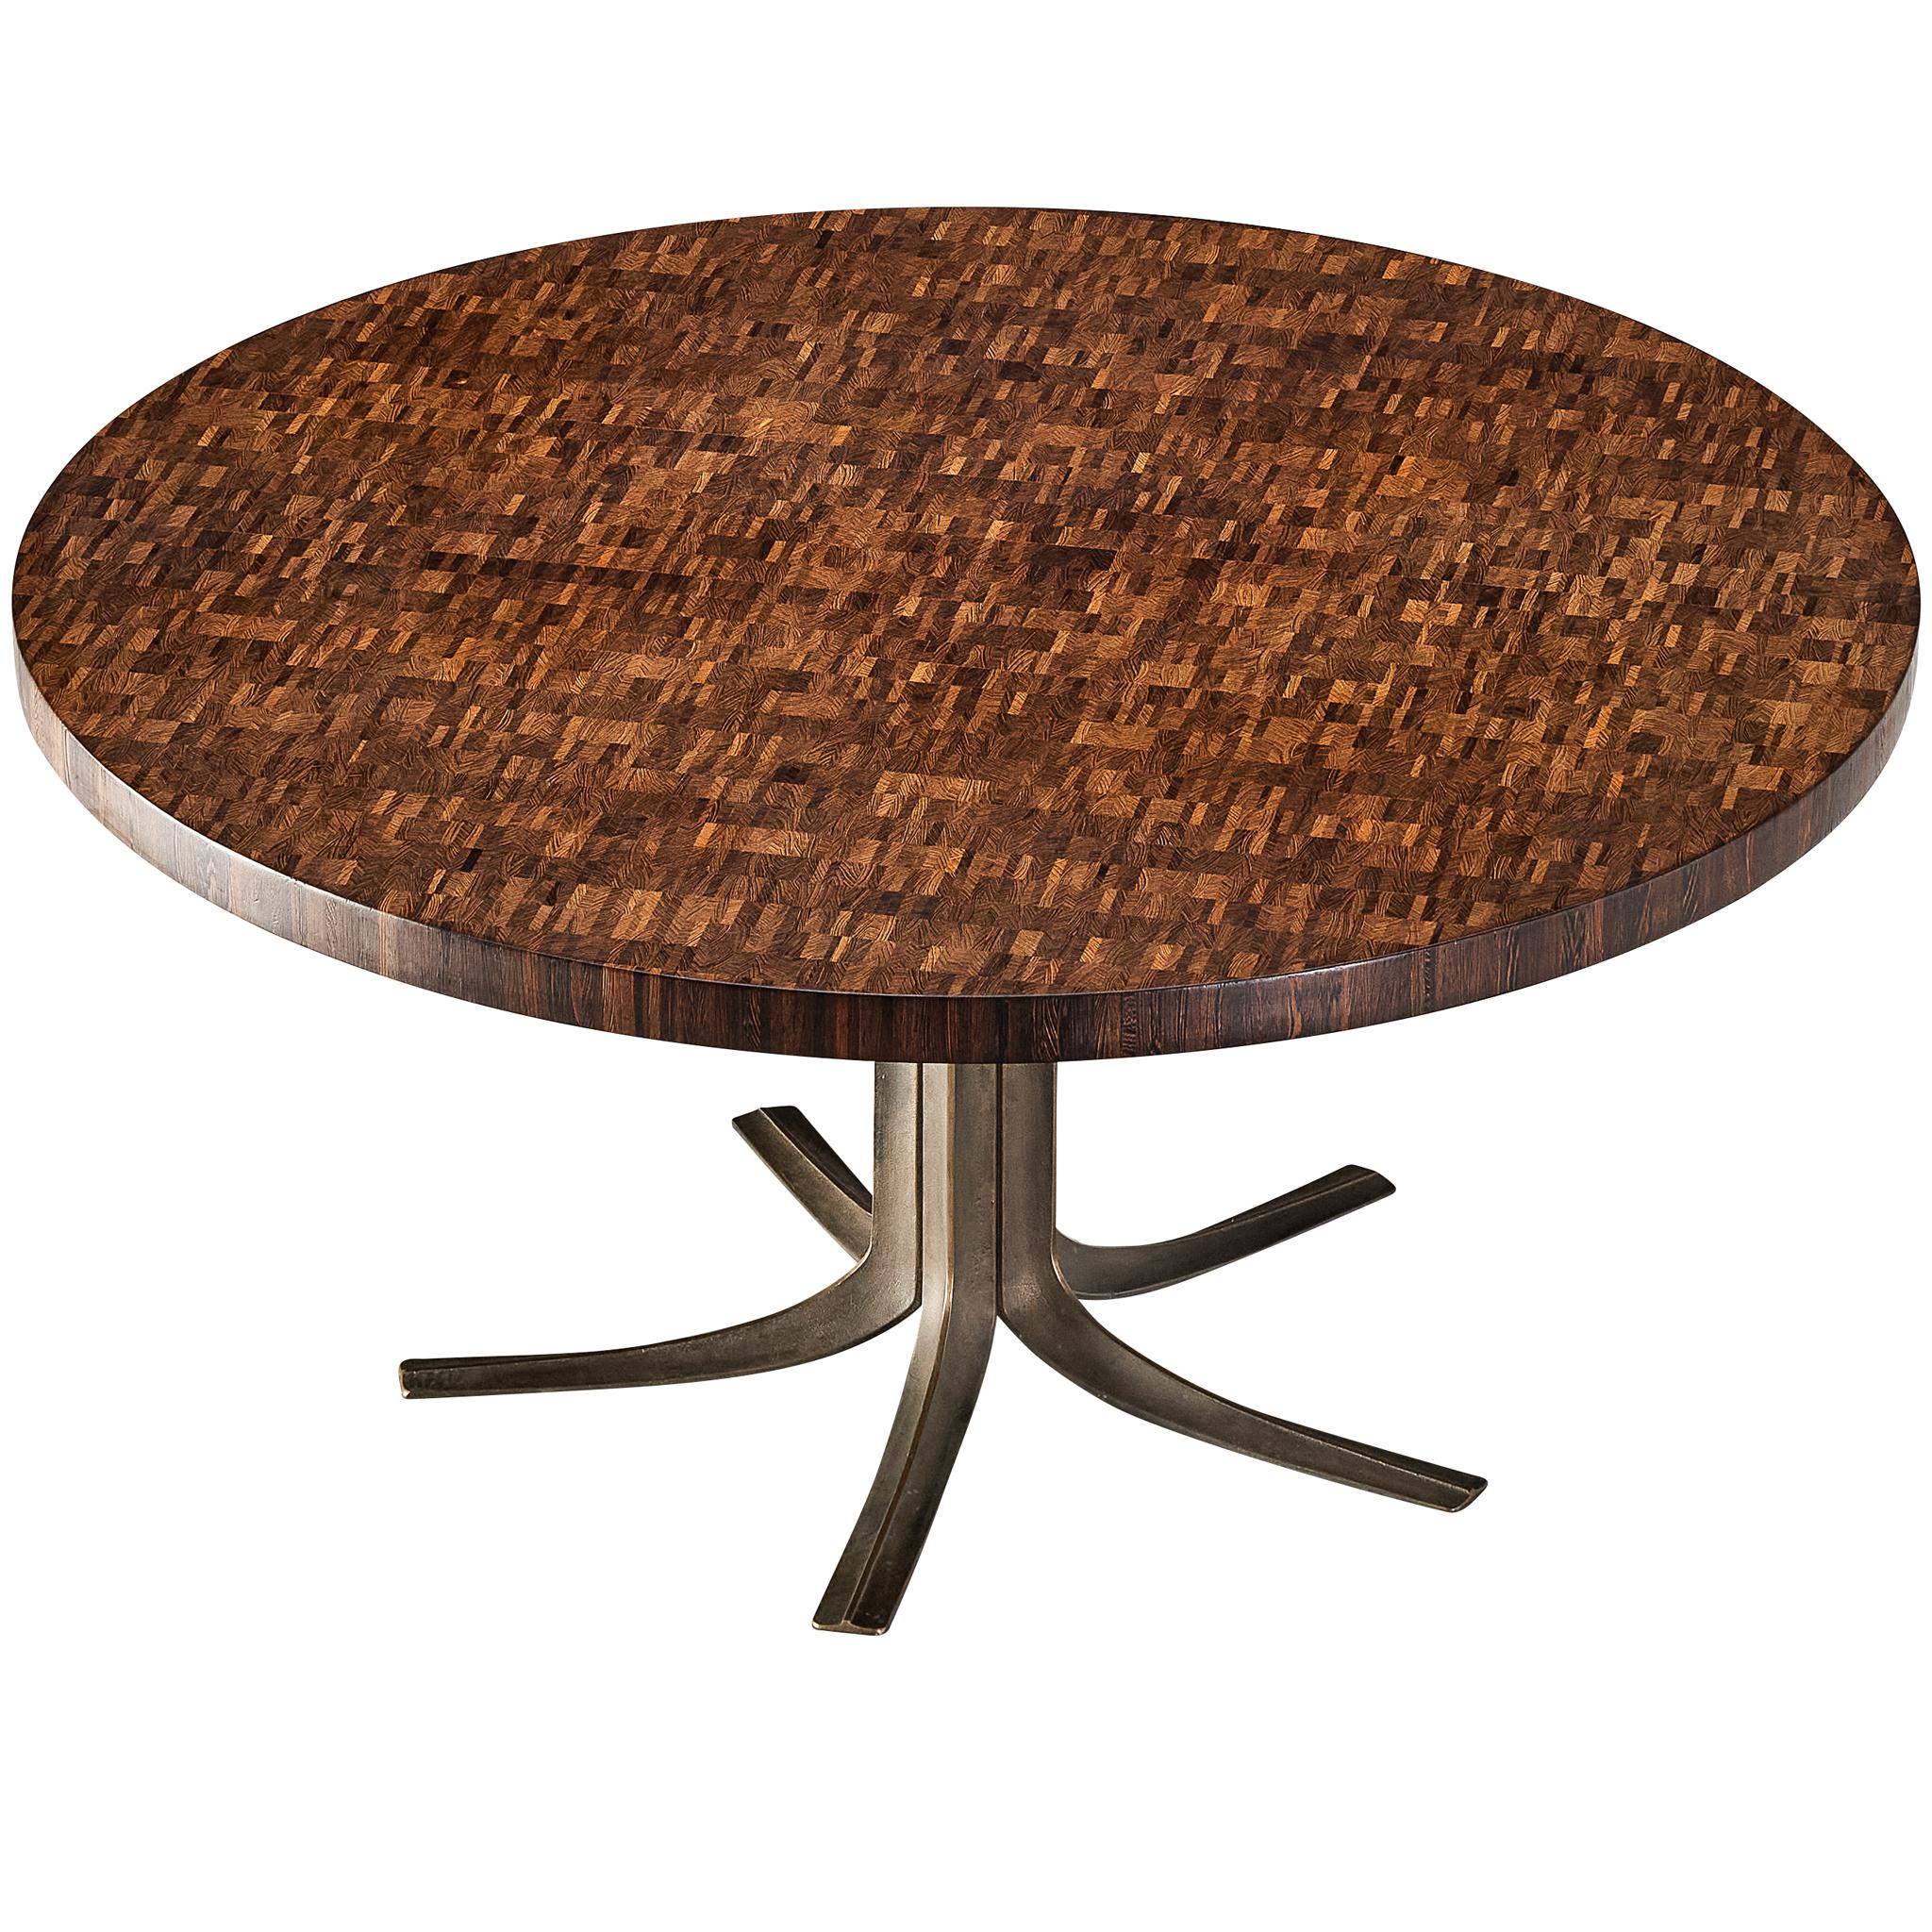 Jules Wabbes Center Table with Tulip Base in Wengé and Bronze  For Sale